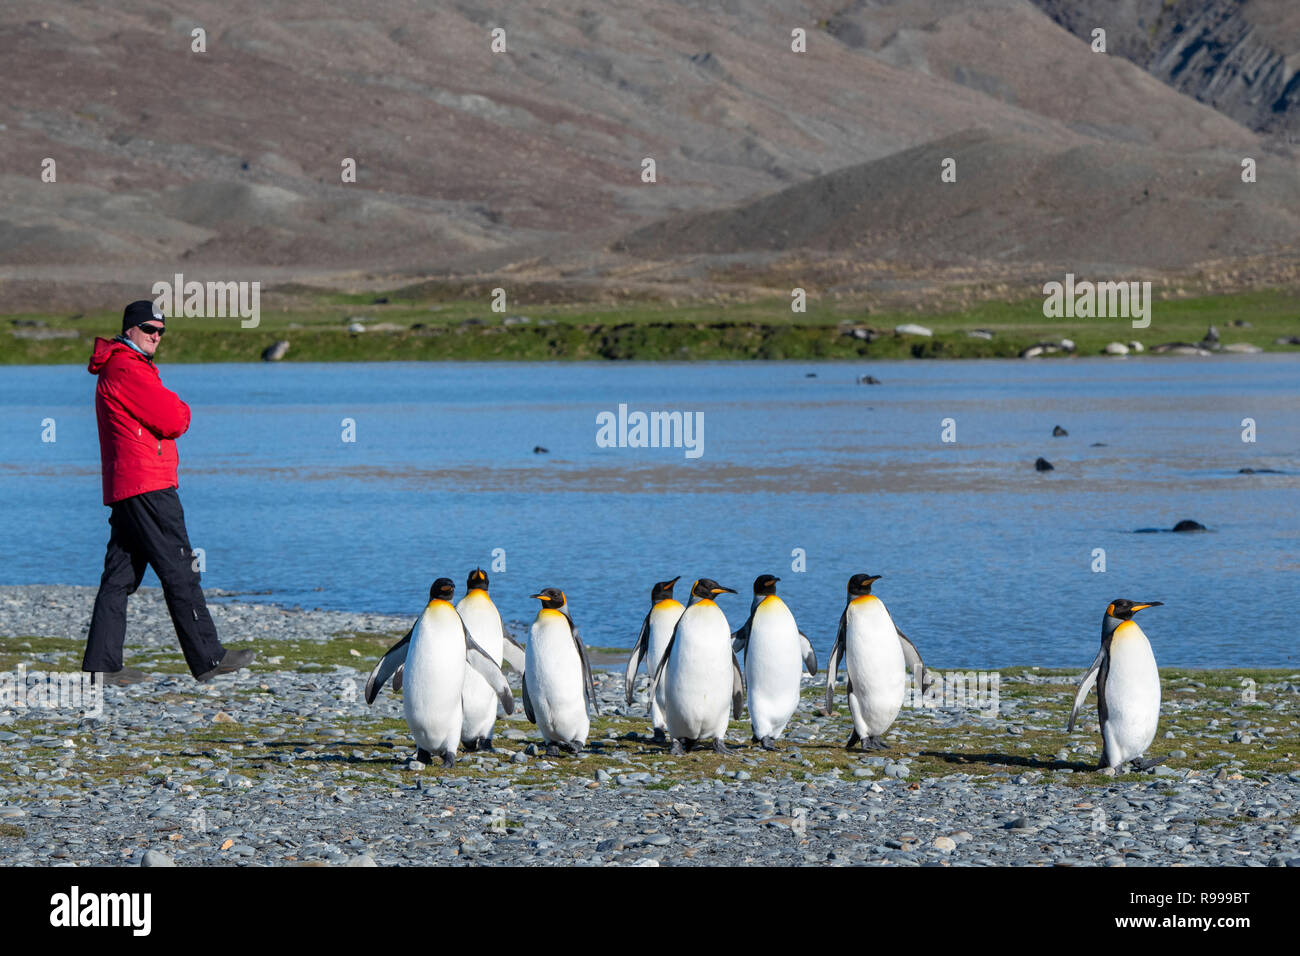 United Kingdom, South Georgia, Fortuna Bay. Adventure tourist exploring Whistle Cove with King penguins and fur seals. Stock Photo